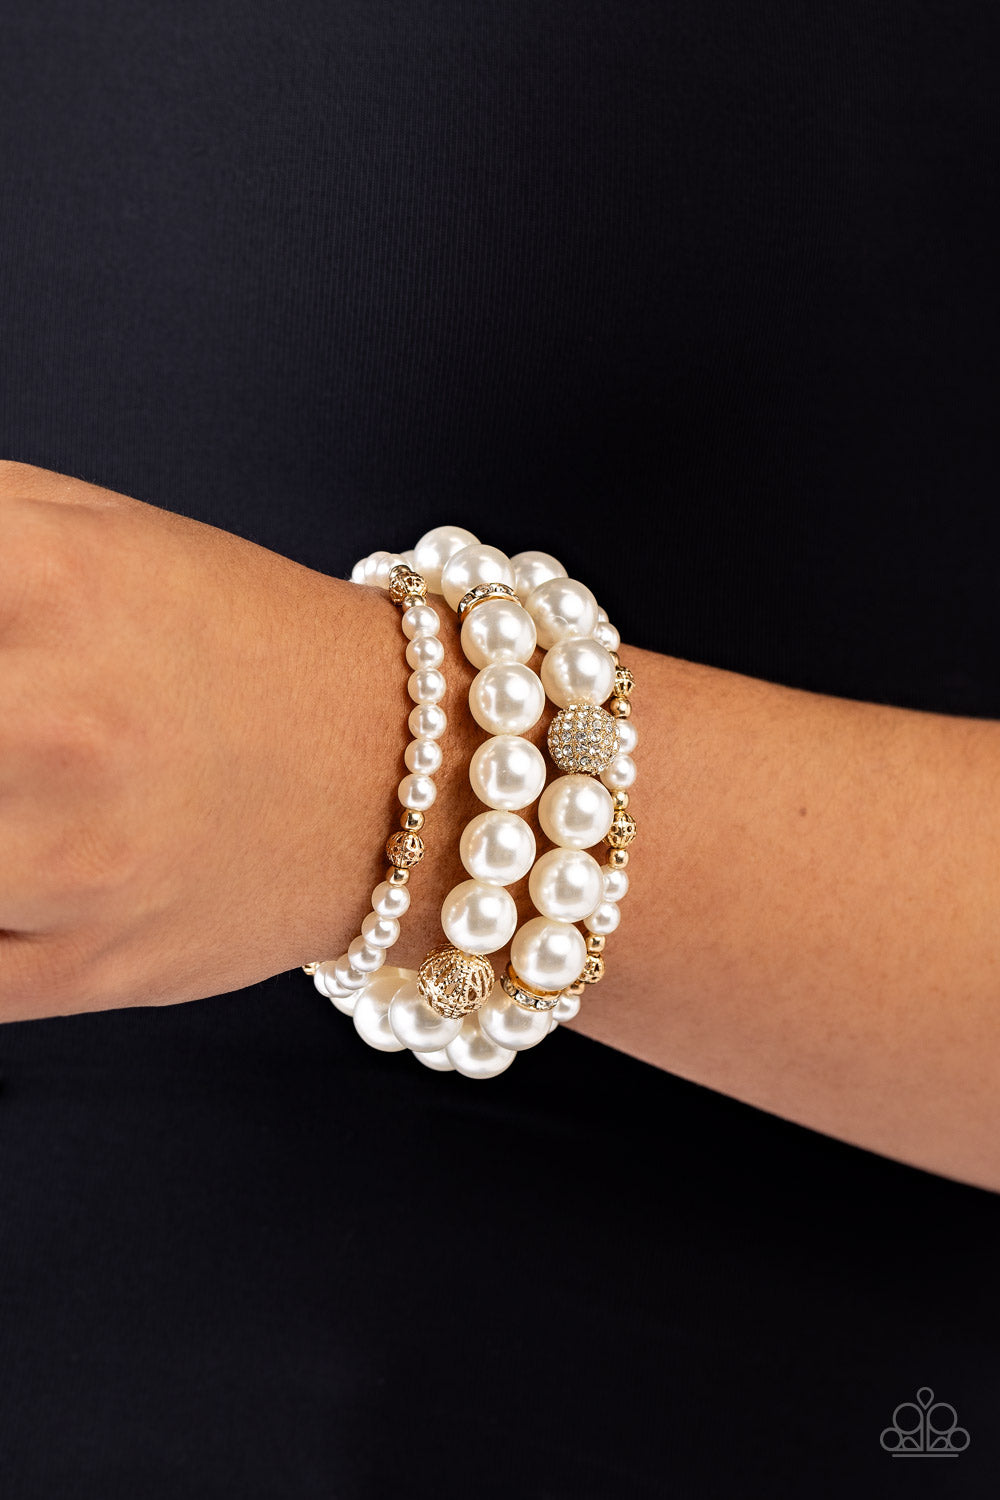 Infused with white rhinestone-encrusted gold beads, white rhinestone-encrusted discs, and textured gold beads, a bubbly collection of mismatched white pearls are threaded along stretchy bands around the wrist for a vintage-inspired layered look.  Sold as one set of four bracelets.